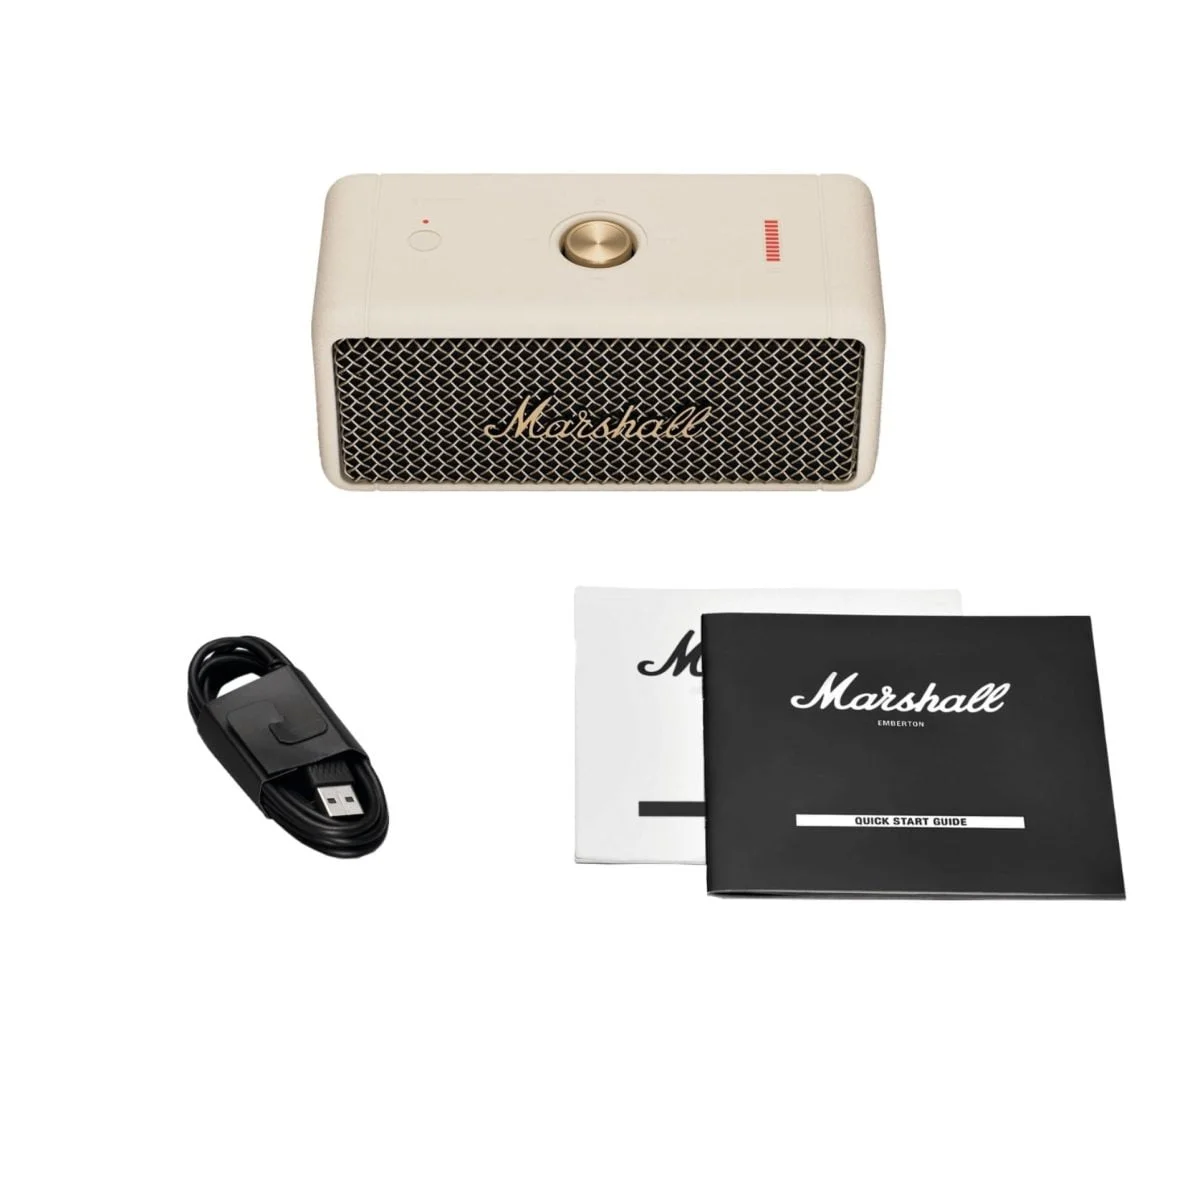 6463394Cv20D Marshall &Lt;H1&Gt;Marshall Emberton Portable Bluetooth Speaker - Cream&Lt;/H1&Gt; Https://Www.youtube.com/Watch?V=Wlqi1Ajwjs0 Emberton Is A Compact Portable Speaker With The Loud And Vibrant Sound Only Marshall Can Deliver. Emberton Utilises True Stereophonic, A Unique Form Of Multi-Directional Sound From Marshall. Experience Absolute 360° Sound Where Every Spot Is A Sweet Spot. With 20+ Hours Of Playtime, You Can Enjoy The Superior Sound Of Marshall For Hours On End. Marshall Emberton Bluetooth Speaker Marshall Emberton Bluetooth Speaker - Cream